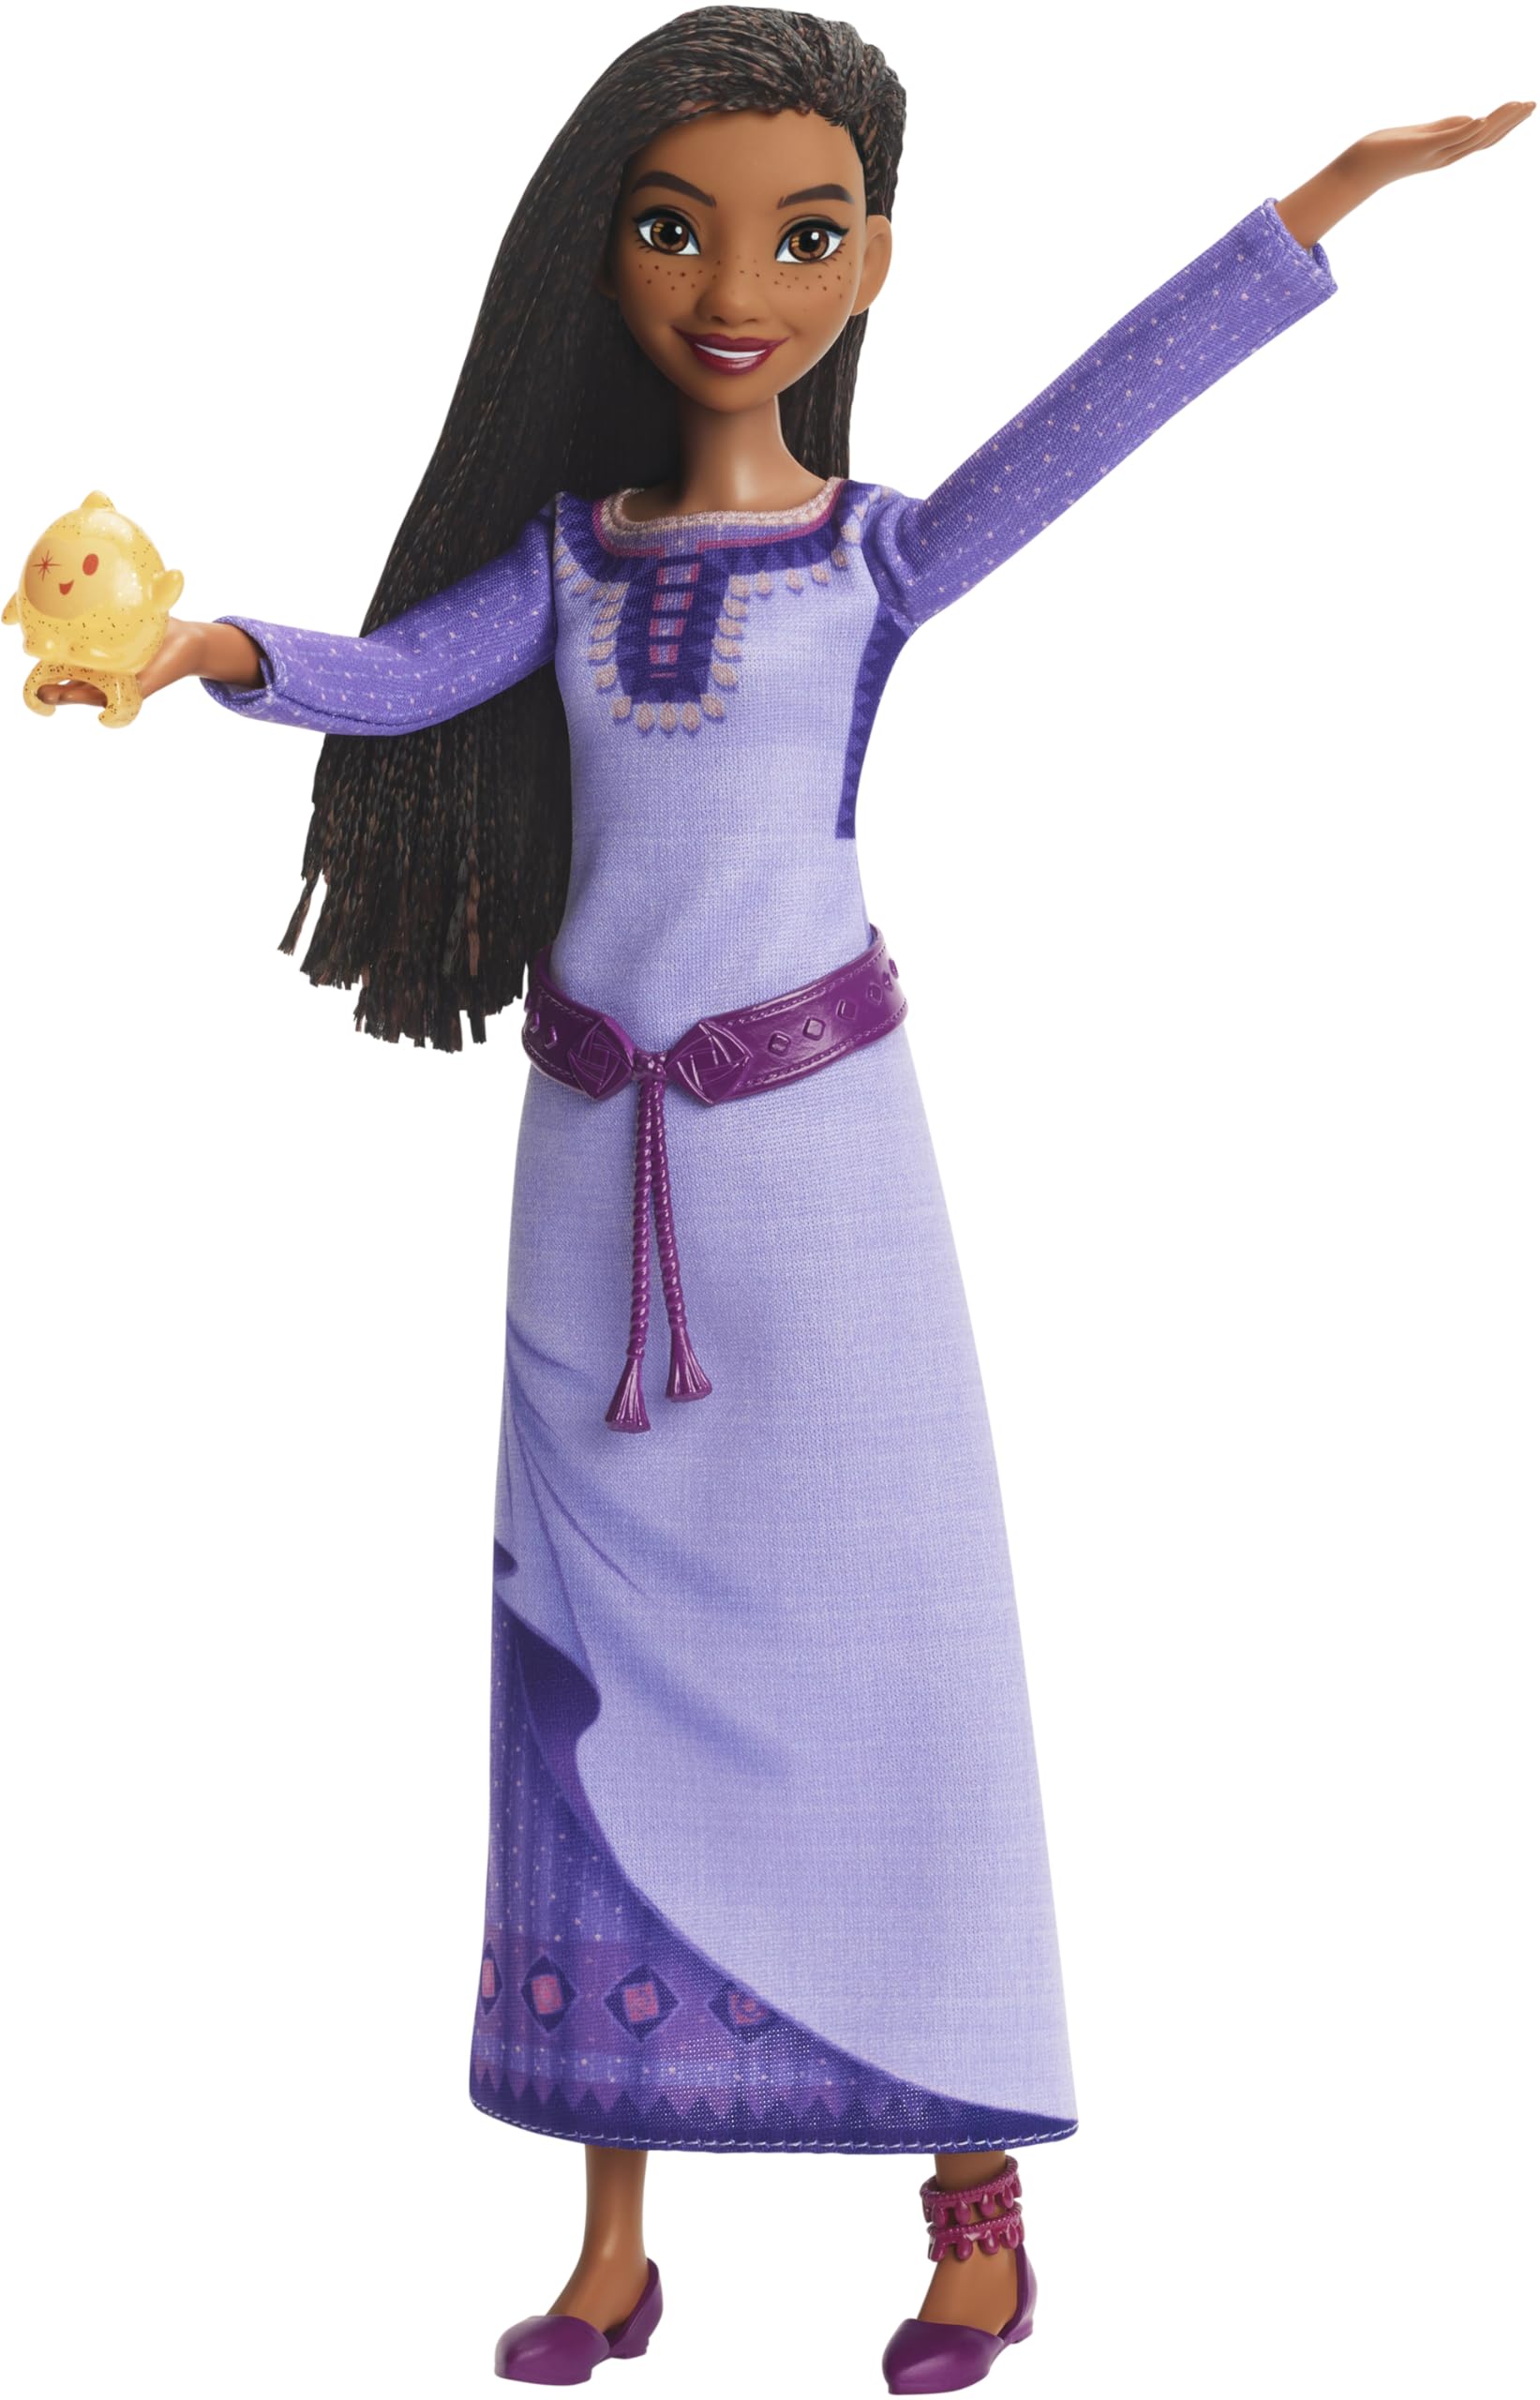 Mattel Disney's Wish Singing Asha of Rosas Fashion Doll & Star Figure, Posable with Removable Outfit, Sings “This Wish” in English